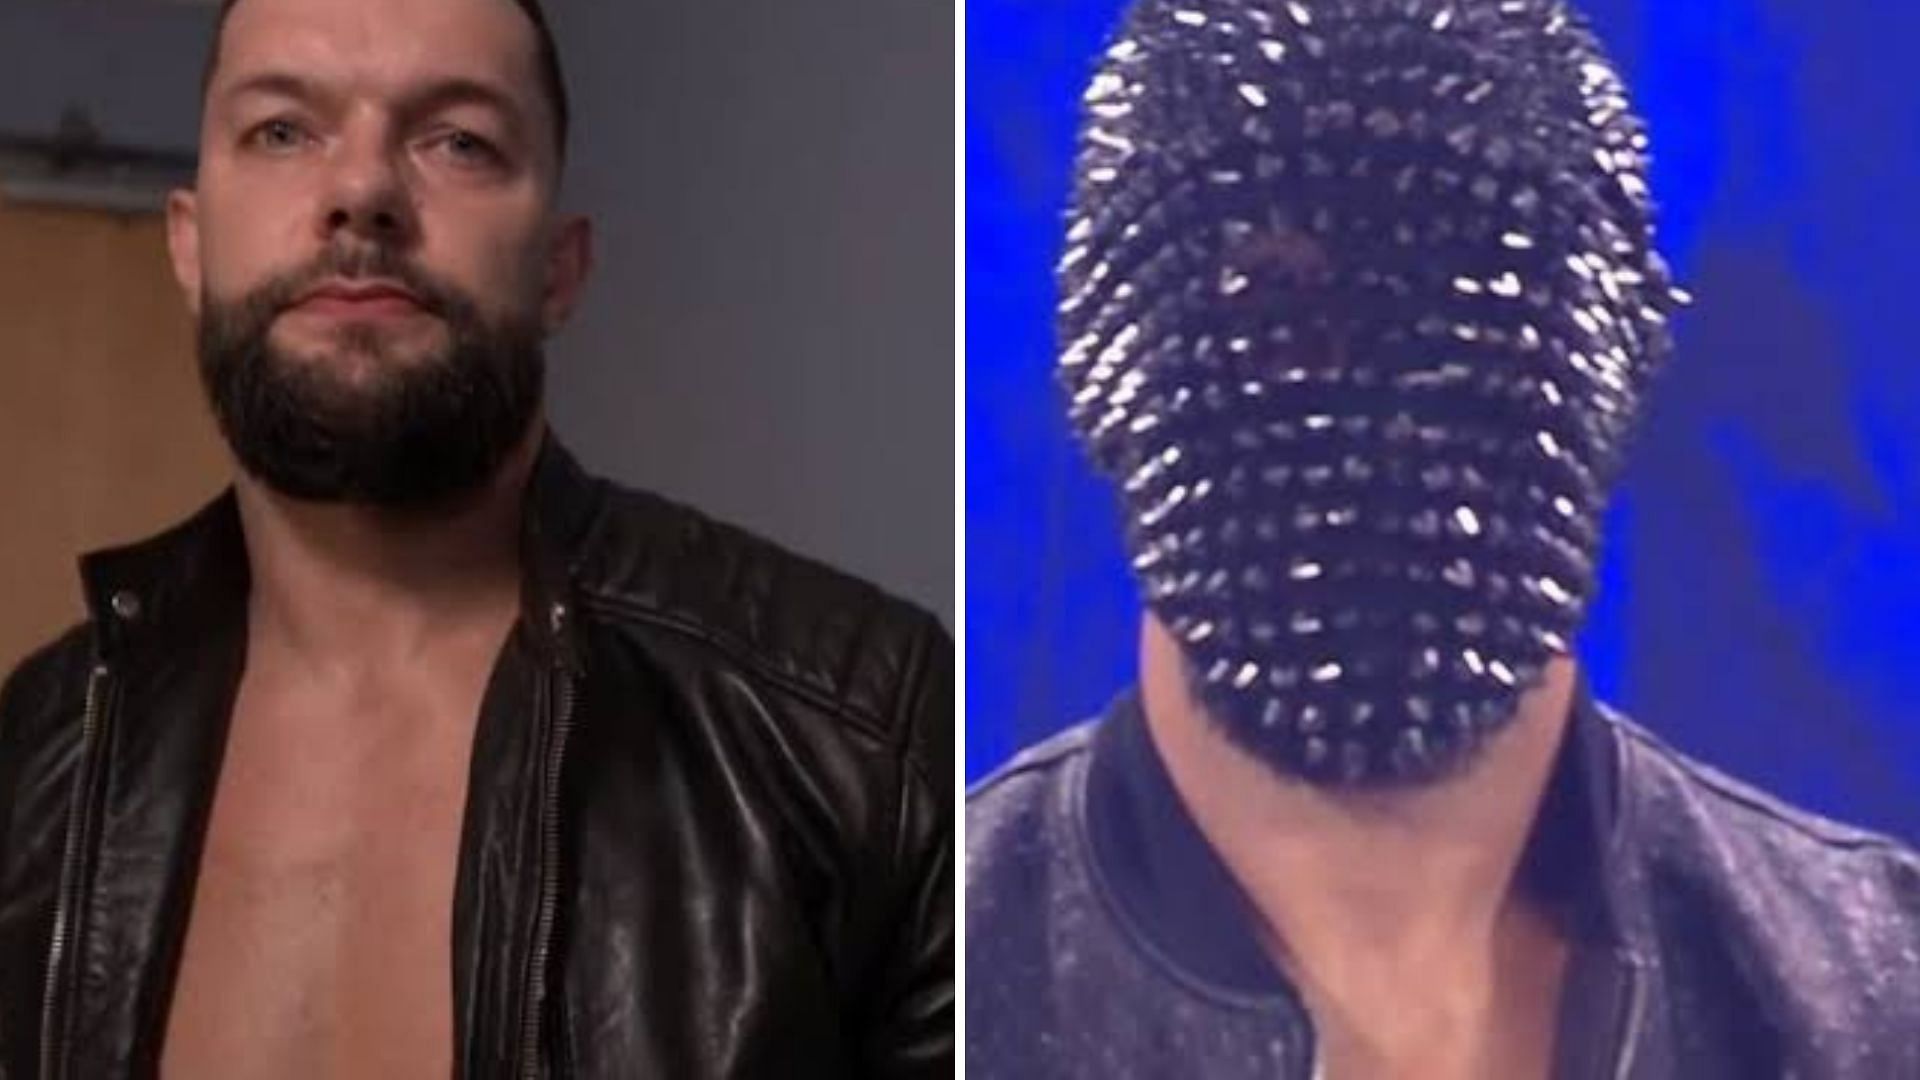 Balor donned a new look at Extreme Rules.